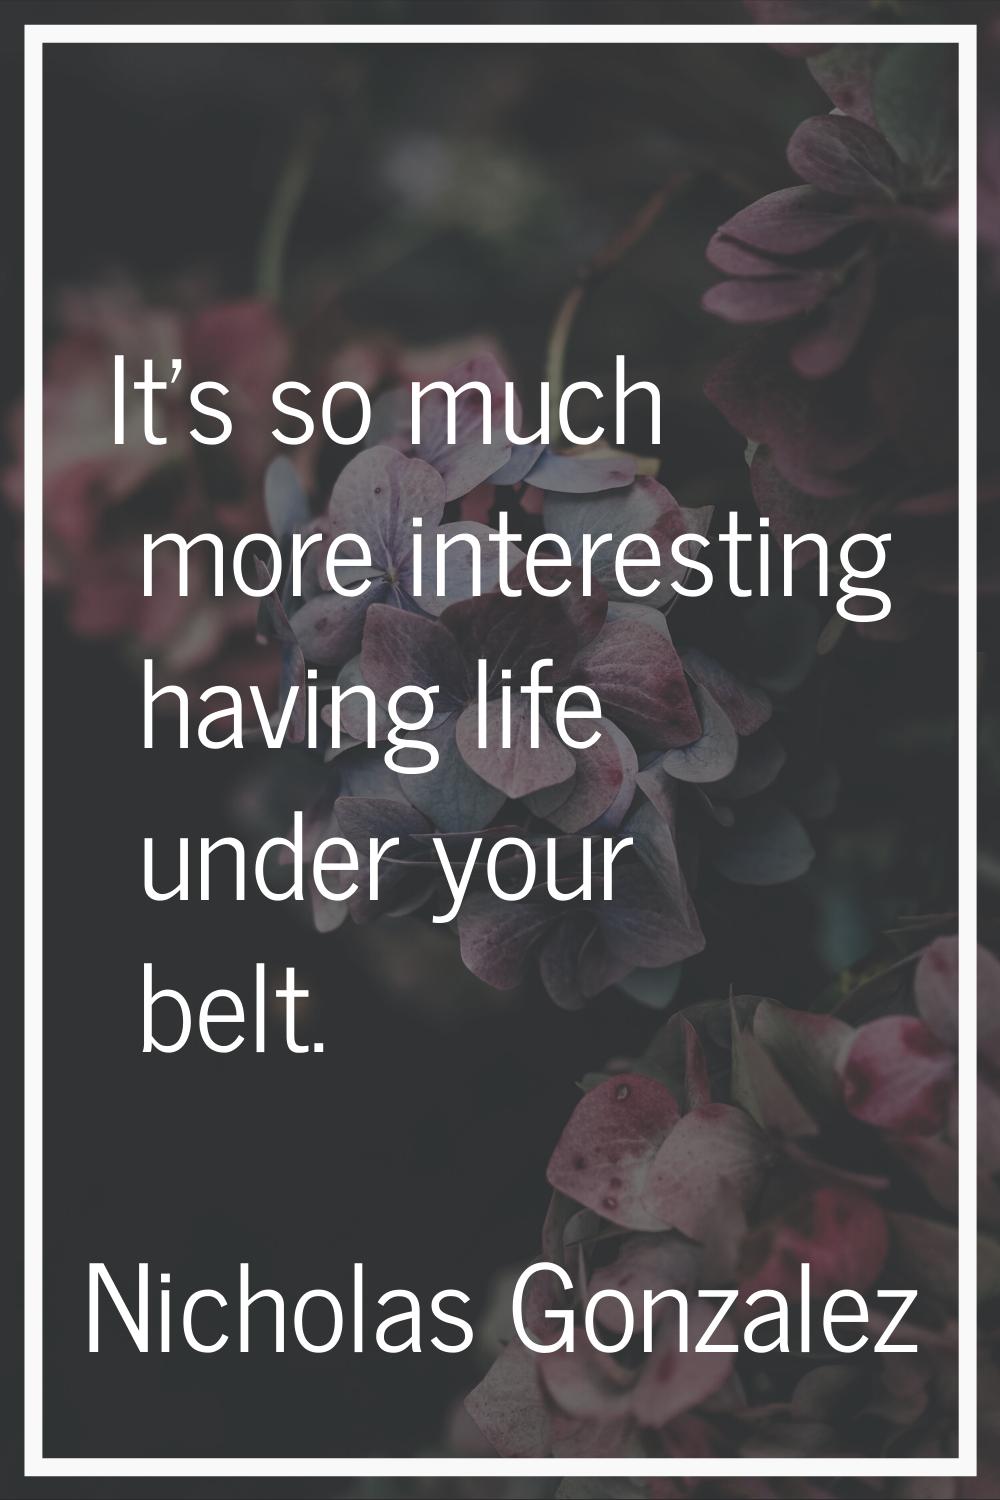 It's so much more interesting having life under your belt.